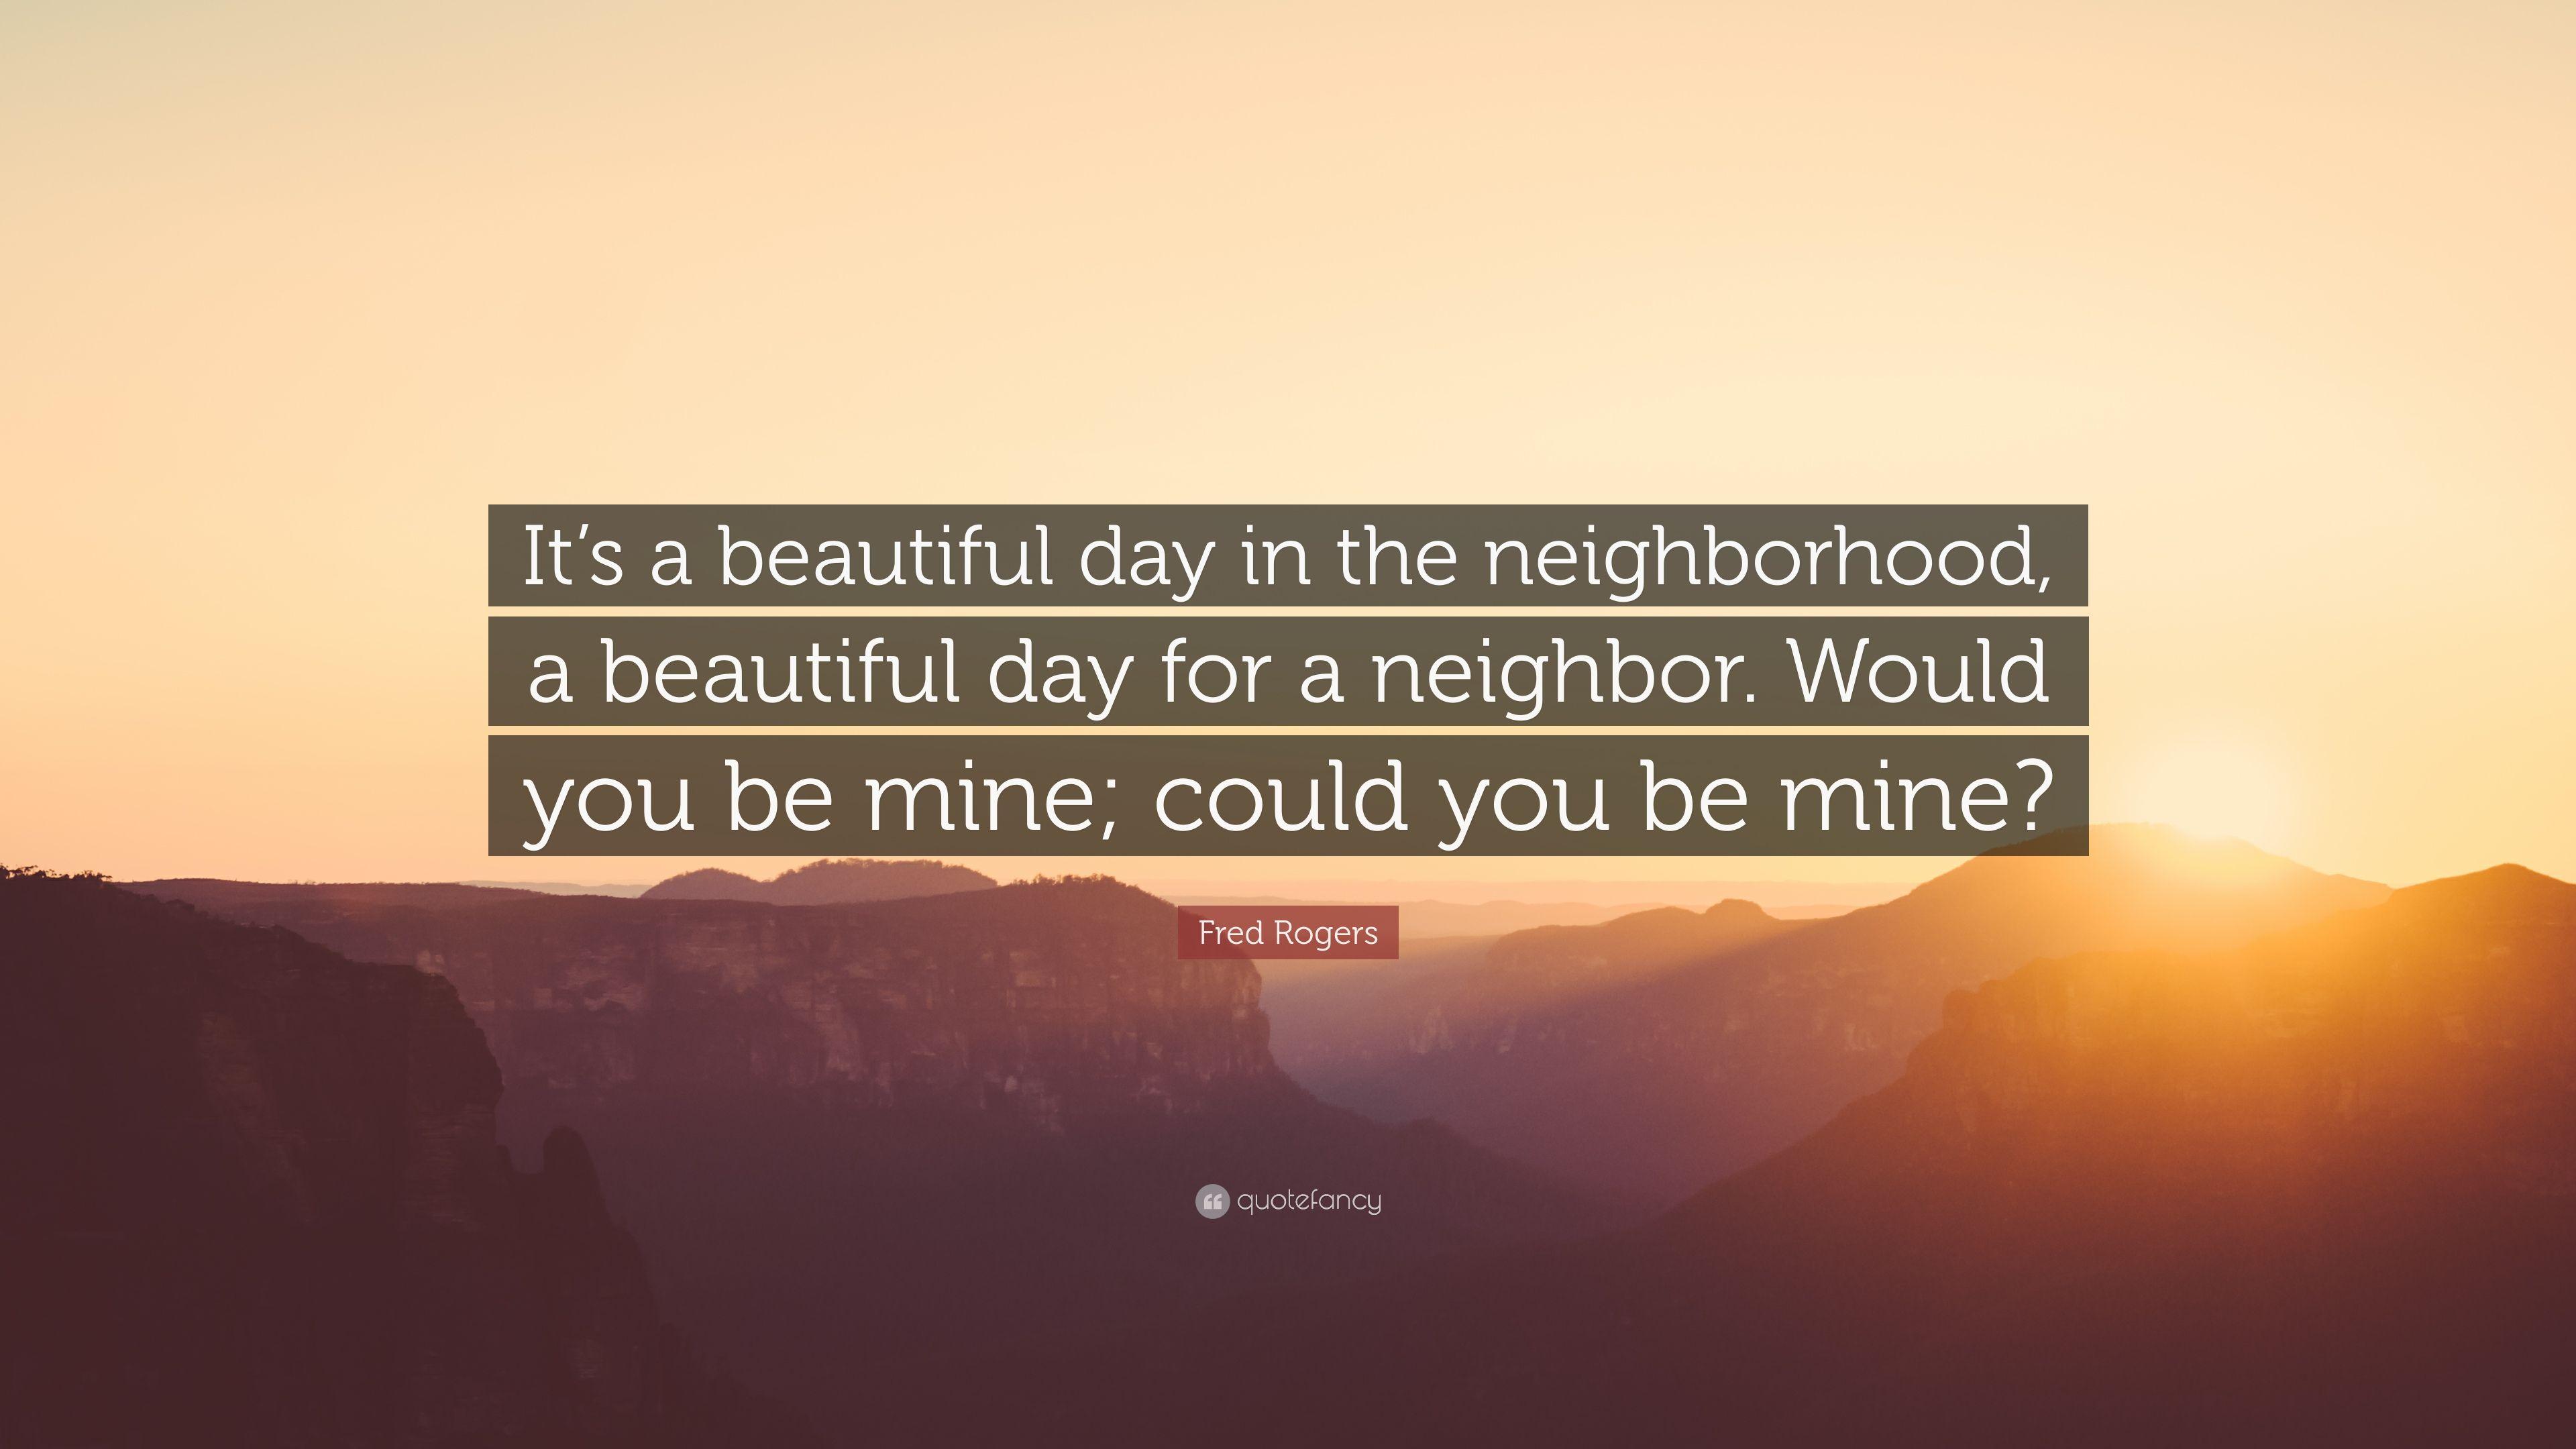 Fred Rogers Quote: “It's a beautiful day in the neighborhood, a